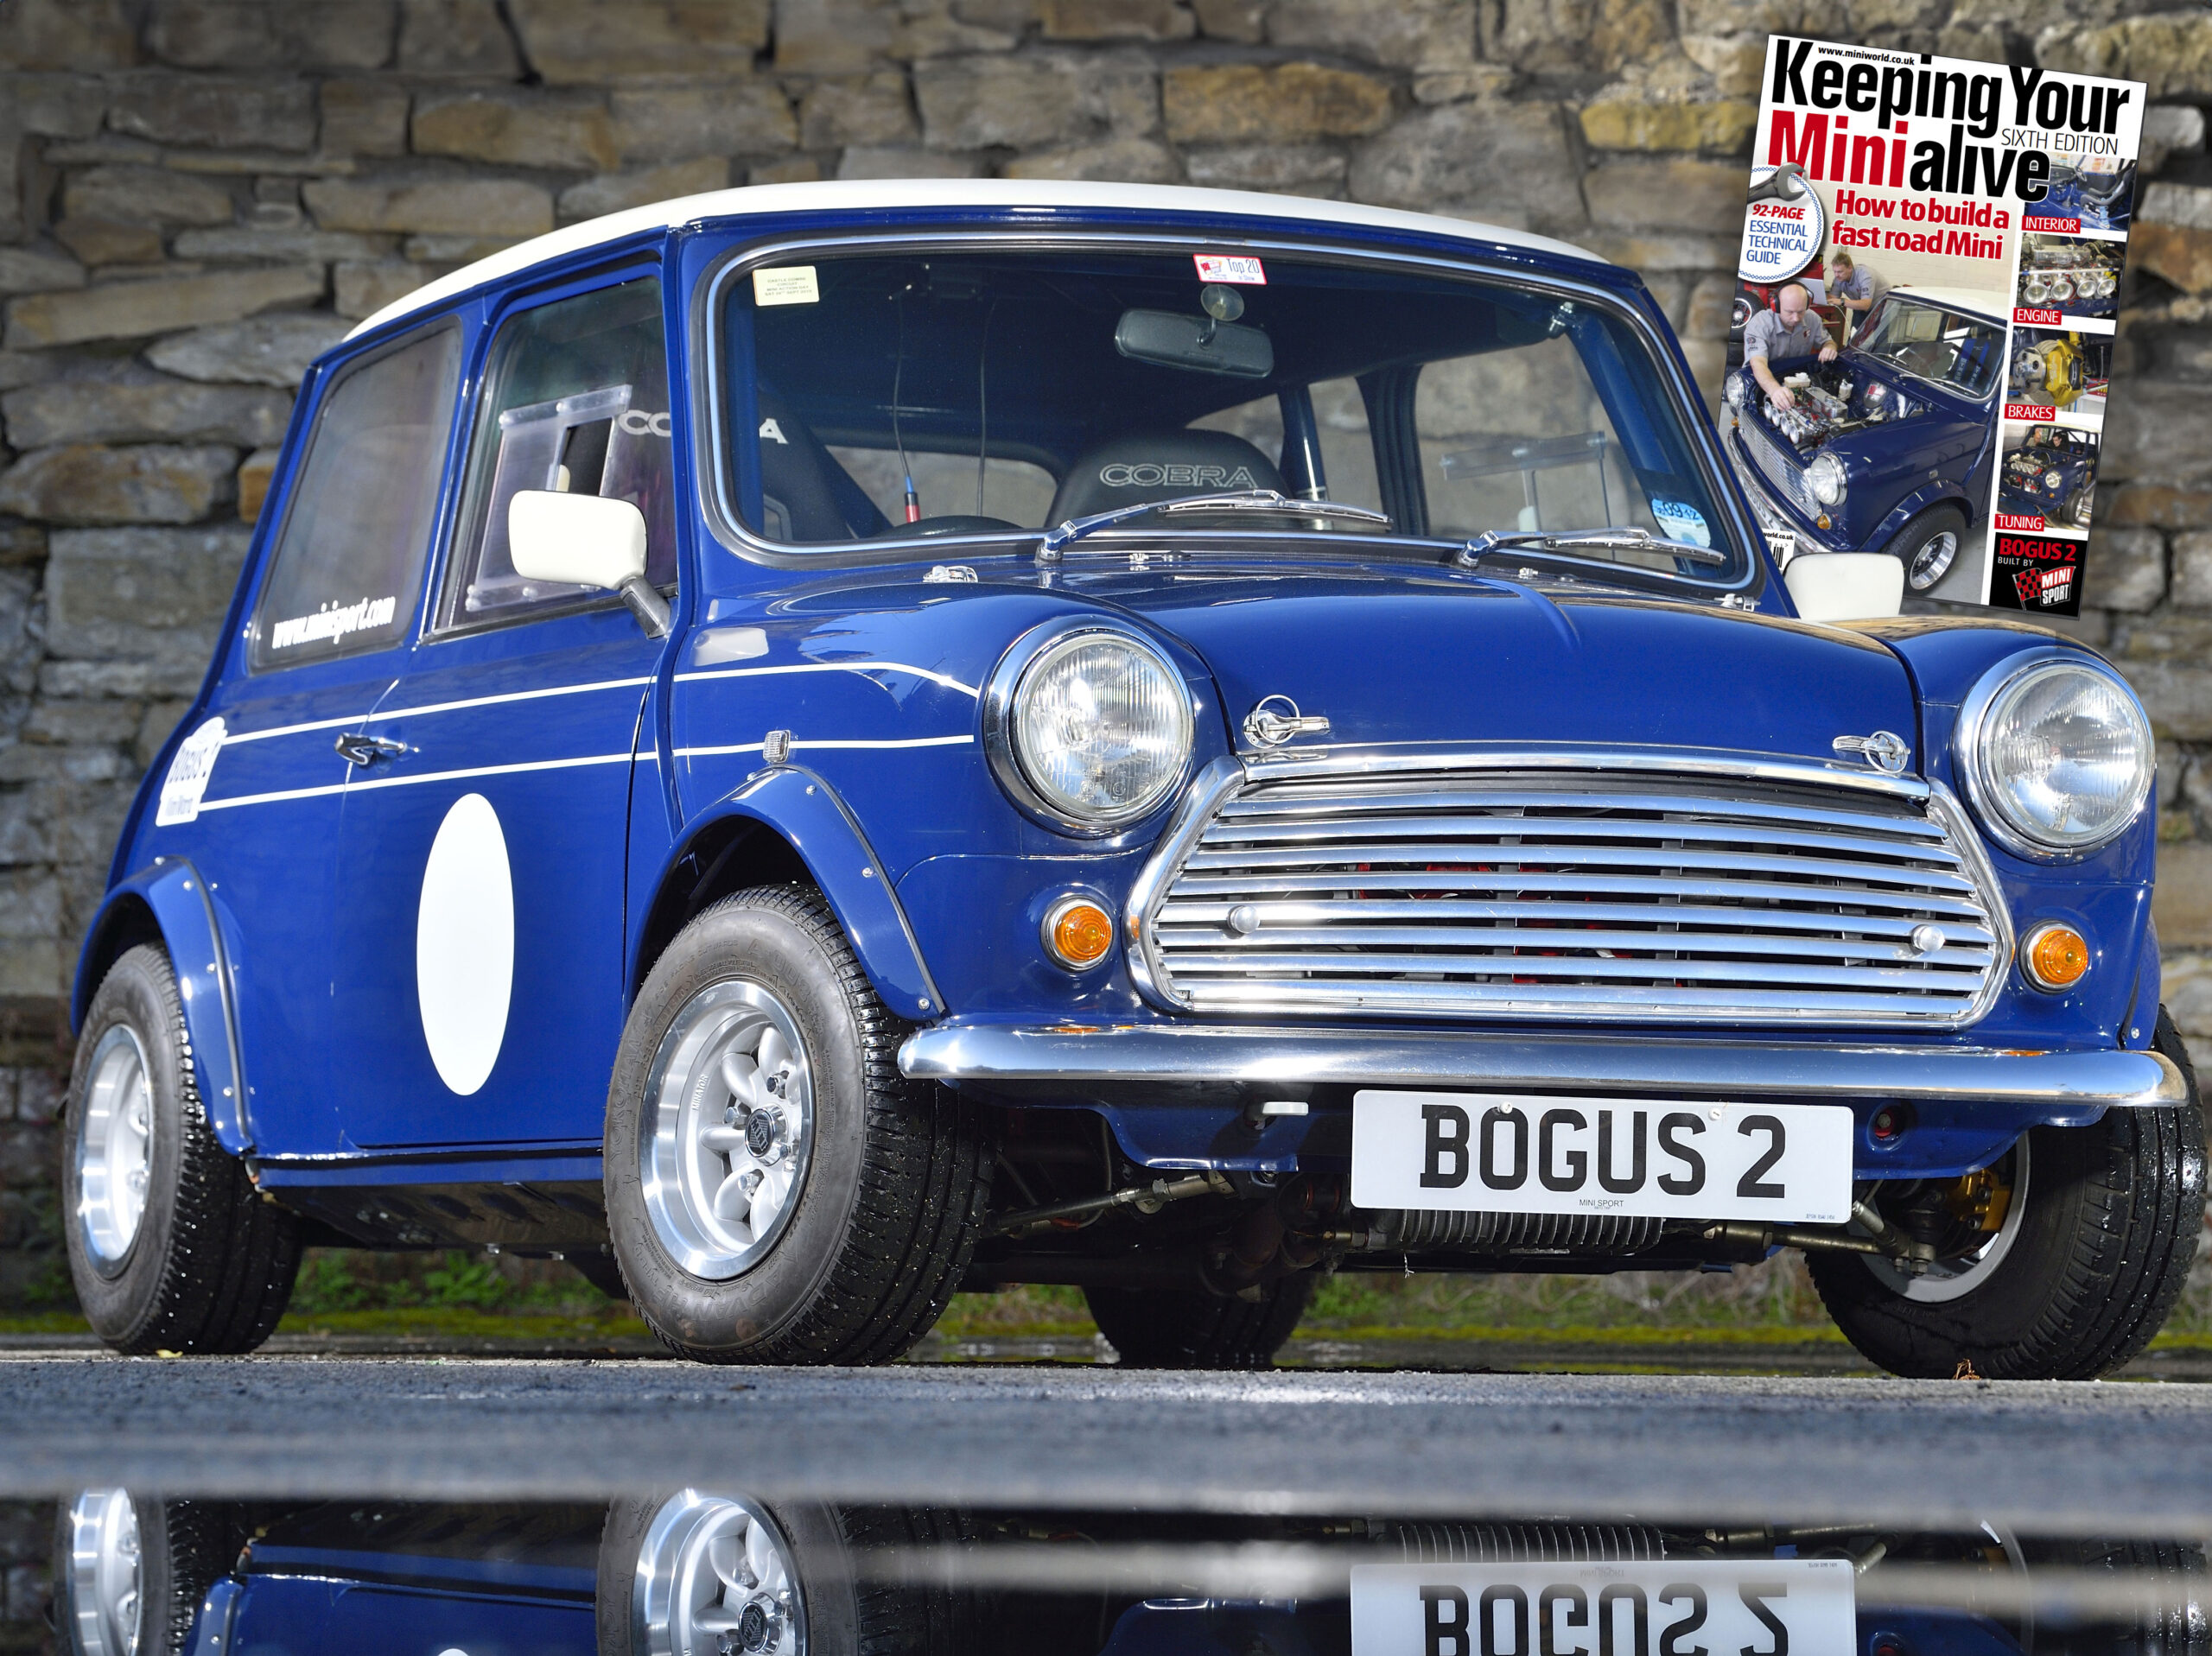 Fully modified classic Mini, Project Bogus 2, built for performance driving on roads and tracks by Mini Sport.